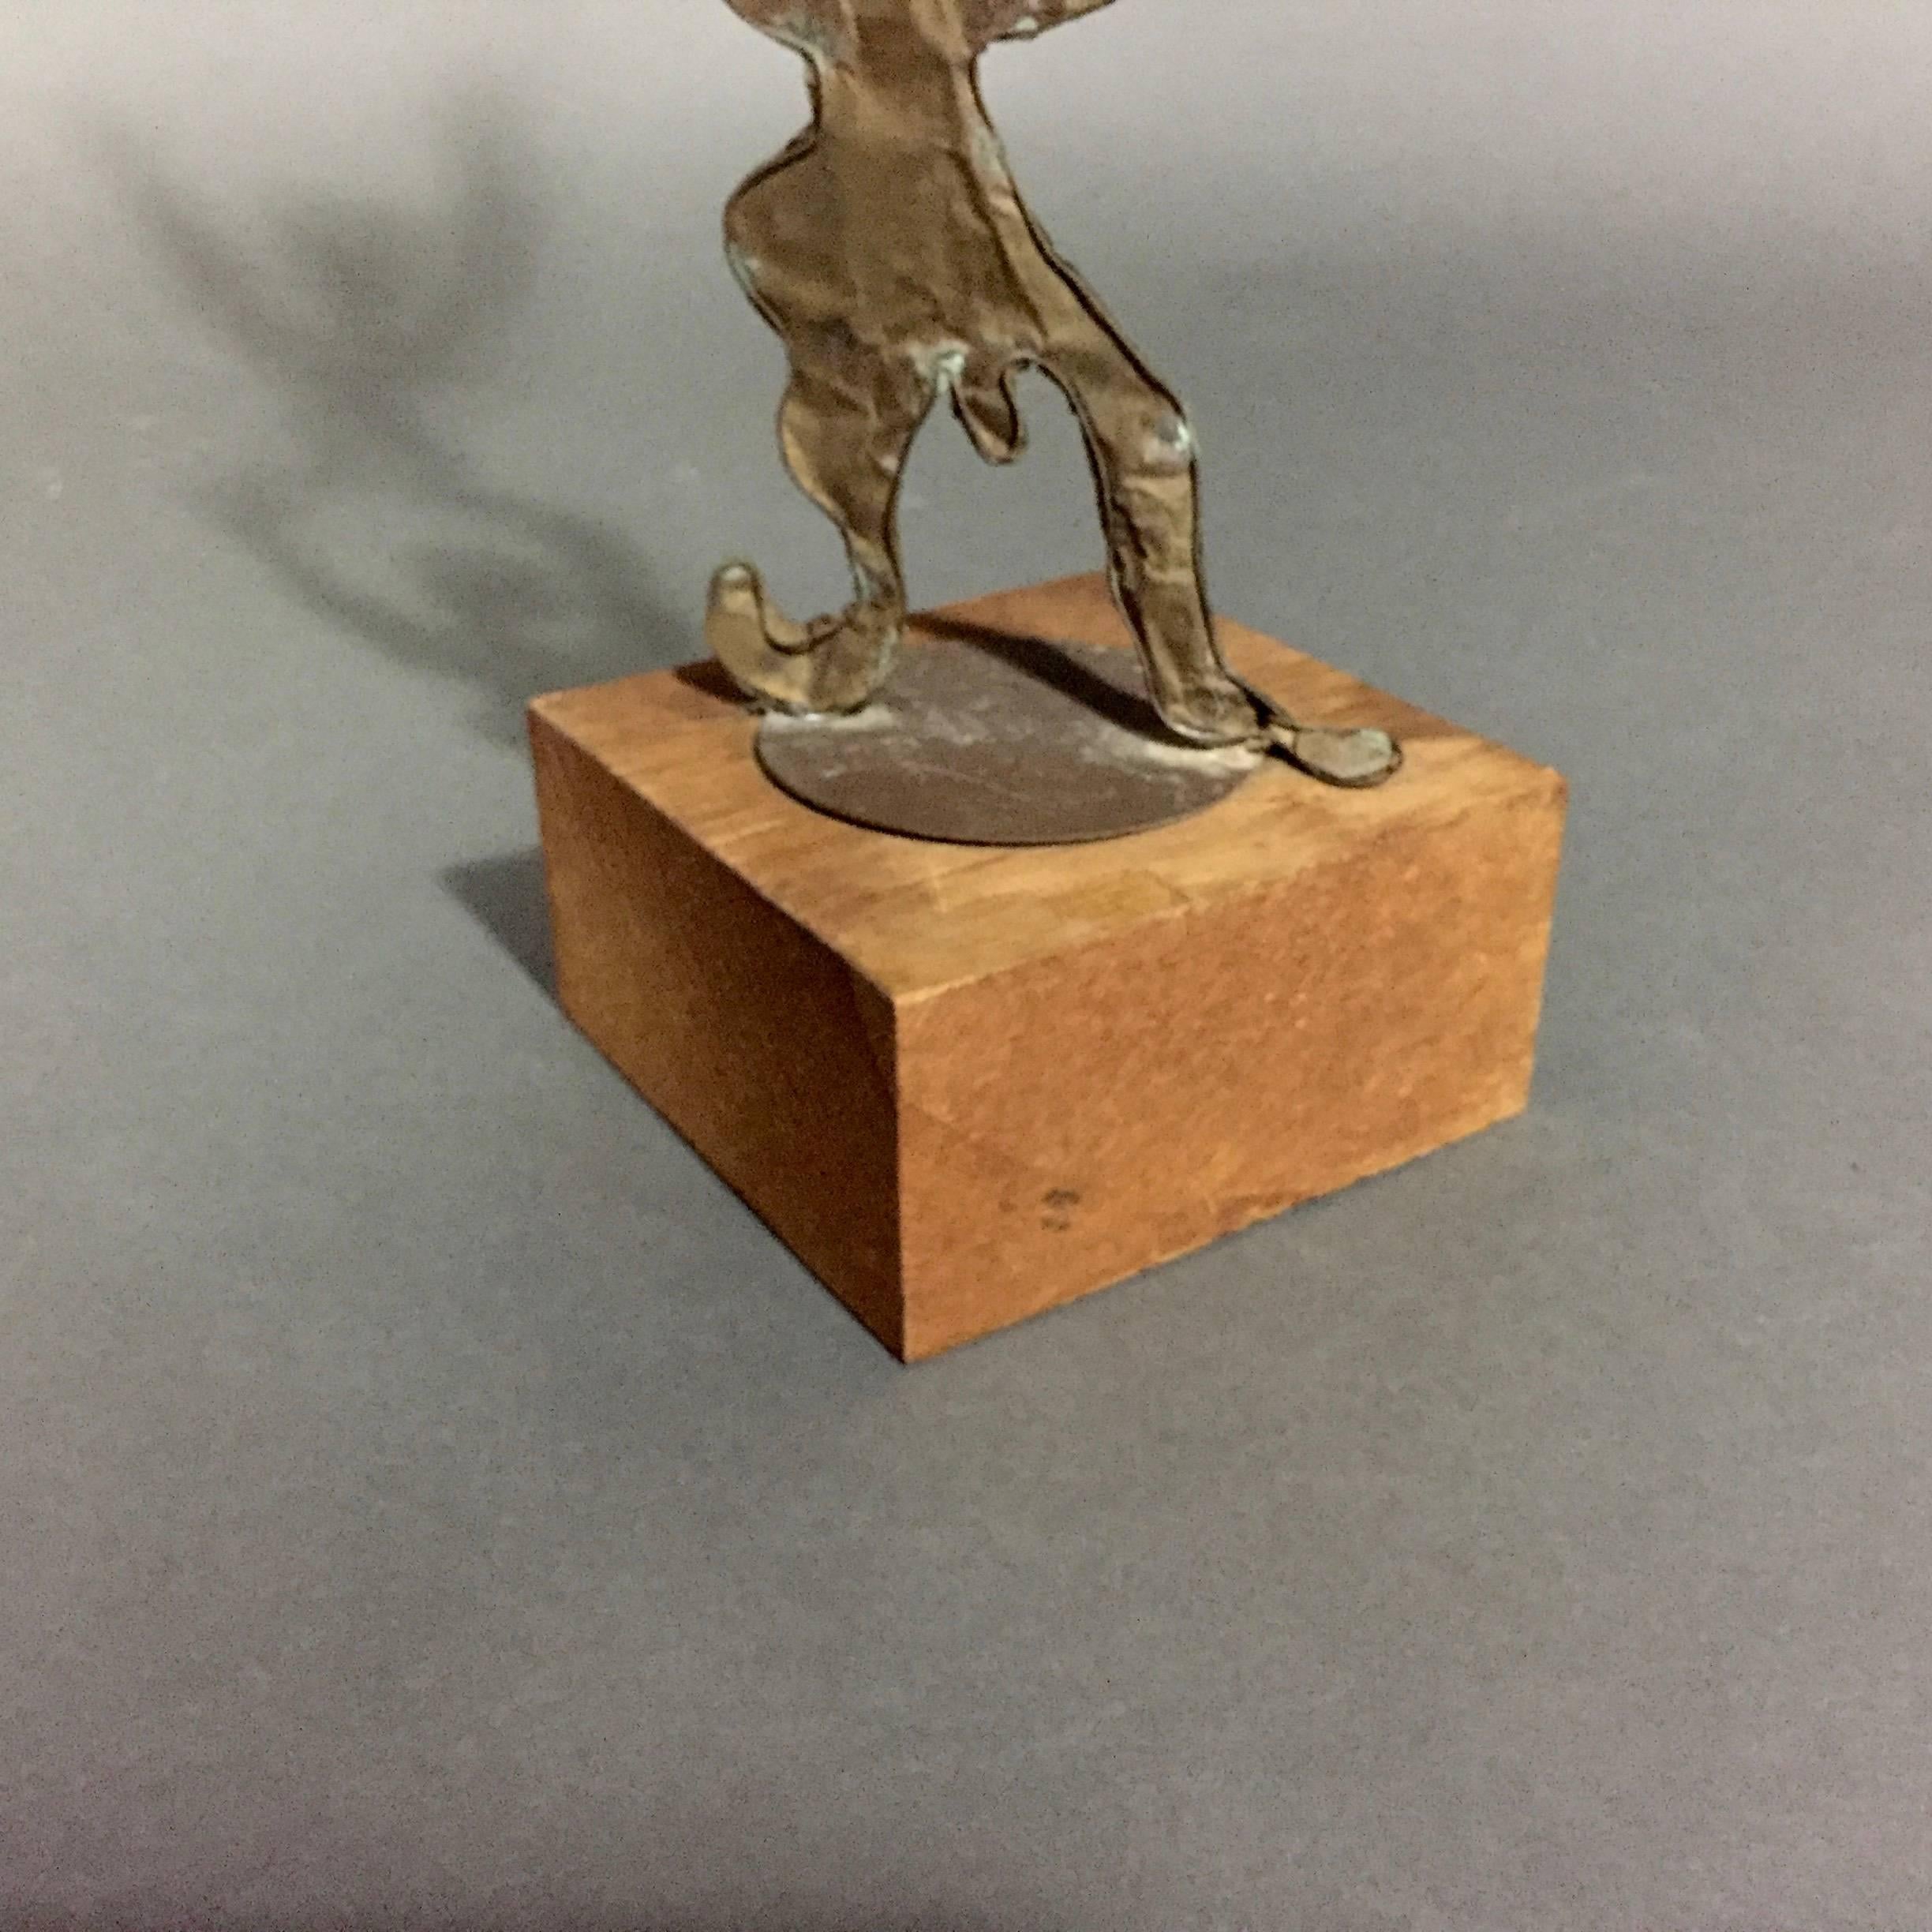 This metal and wire sculpture of circus performers was created between 1918 and 1922 by a Stevens Institute of Technology student and gifted to fellow student John Glover - who kept this in his private collection until his death in 1996.  It has